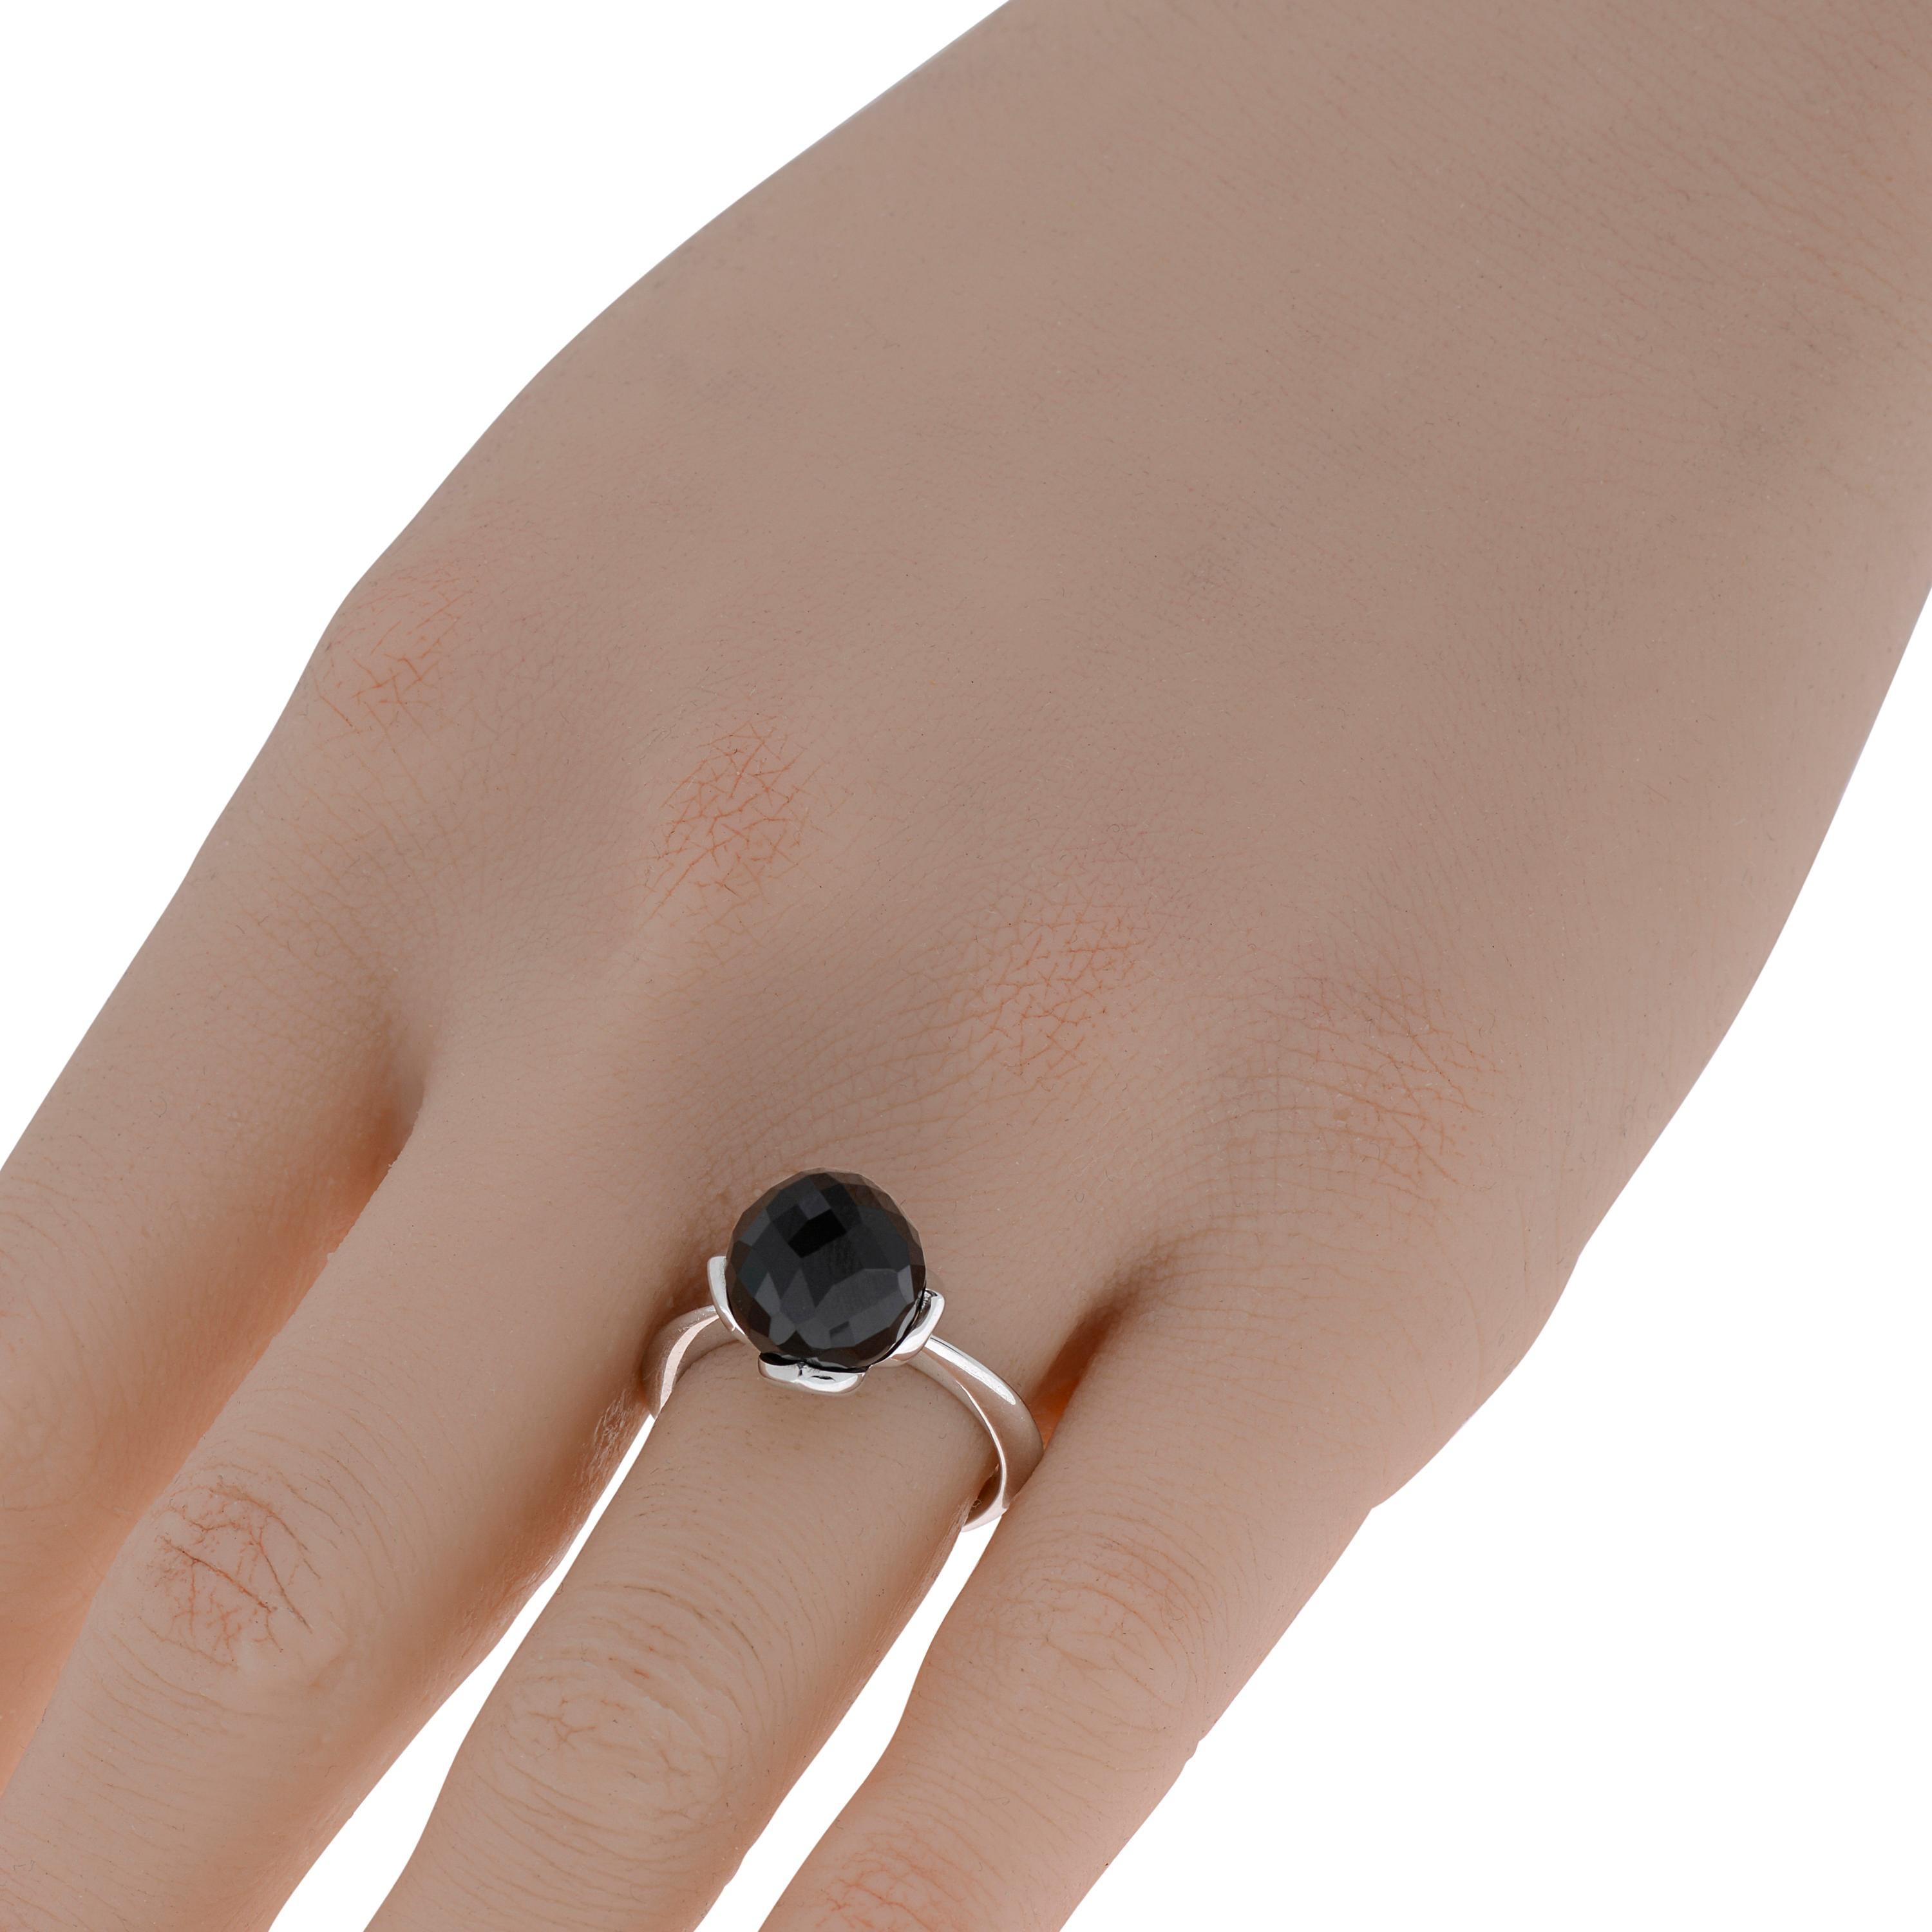 This adventurous Luca Carati 18K White Gold Band Ring features a striking Onyx berry and smooth 18K gold. The ring size is 7 (54.4). The Decoration Size is 12.5mm x 13mm. The Weight is 6.5g.